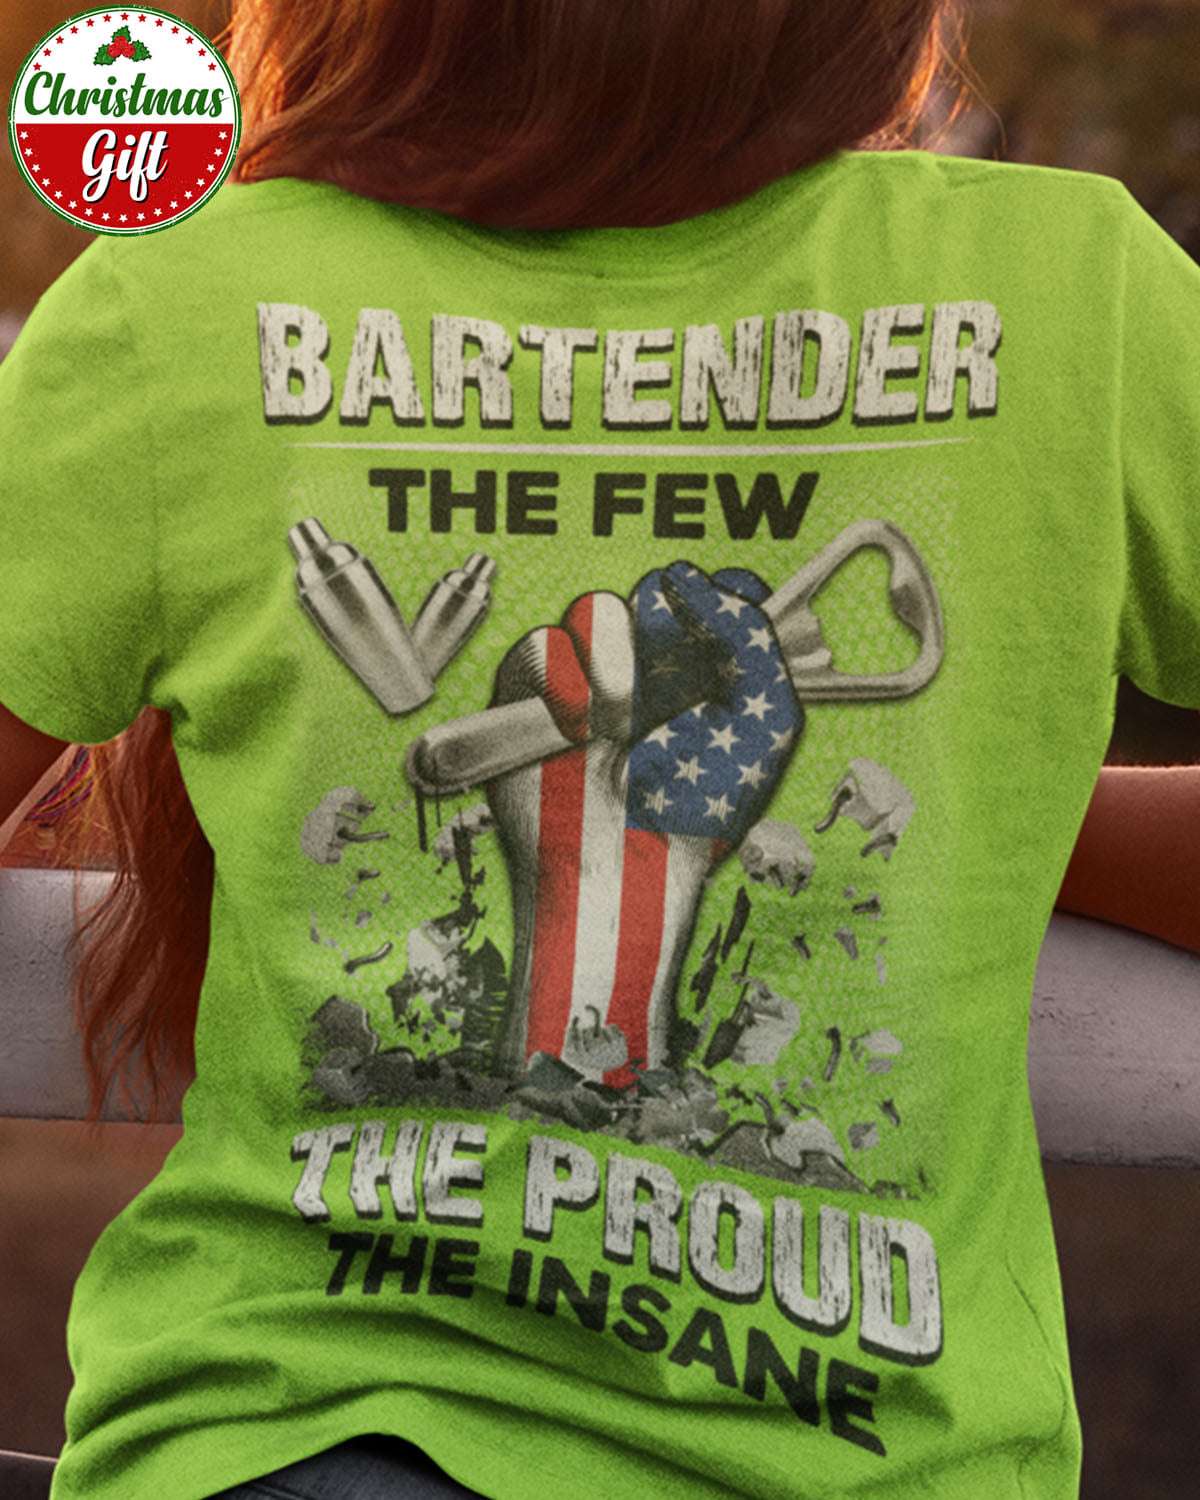 Bartender the few, the proud, the insane - Proud to be Bartender